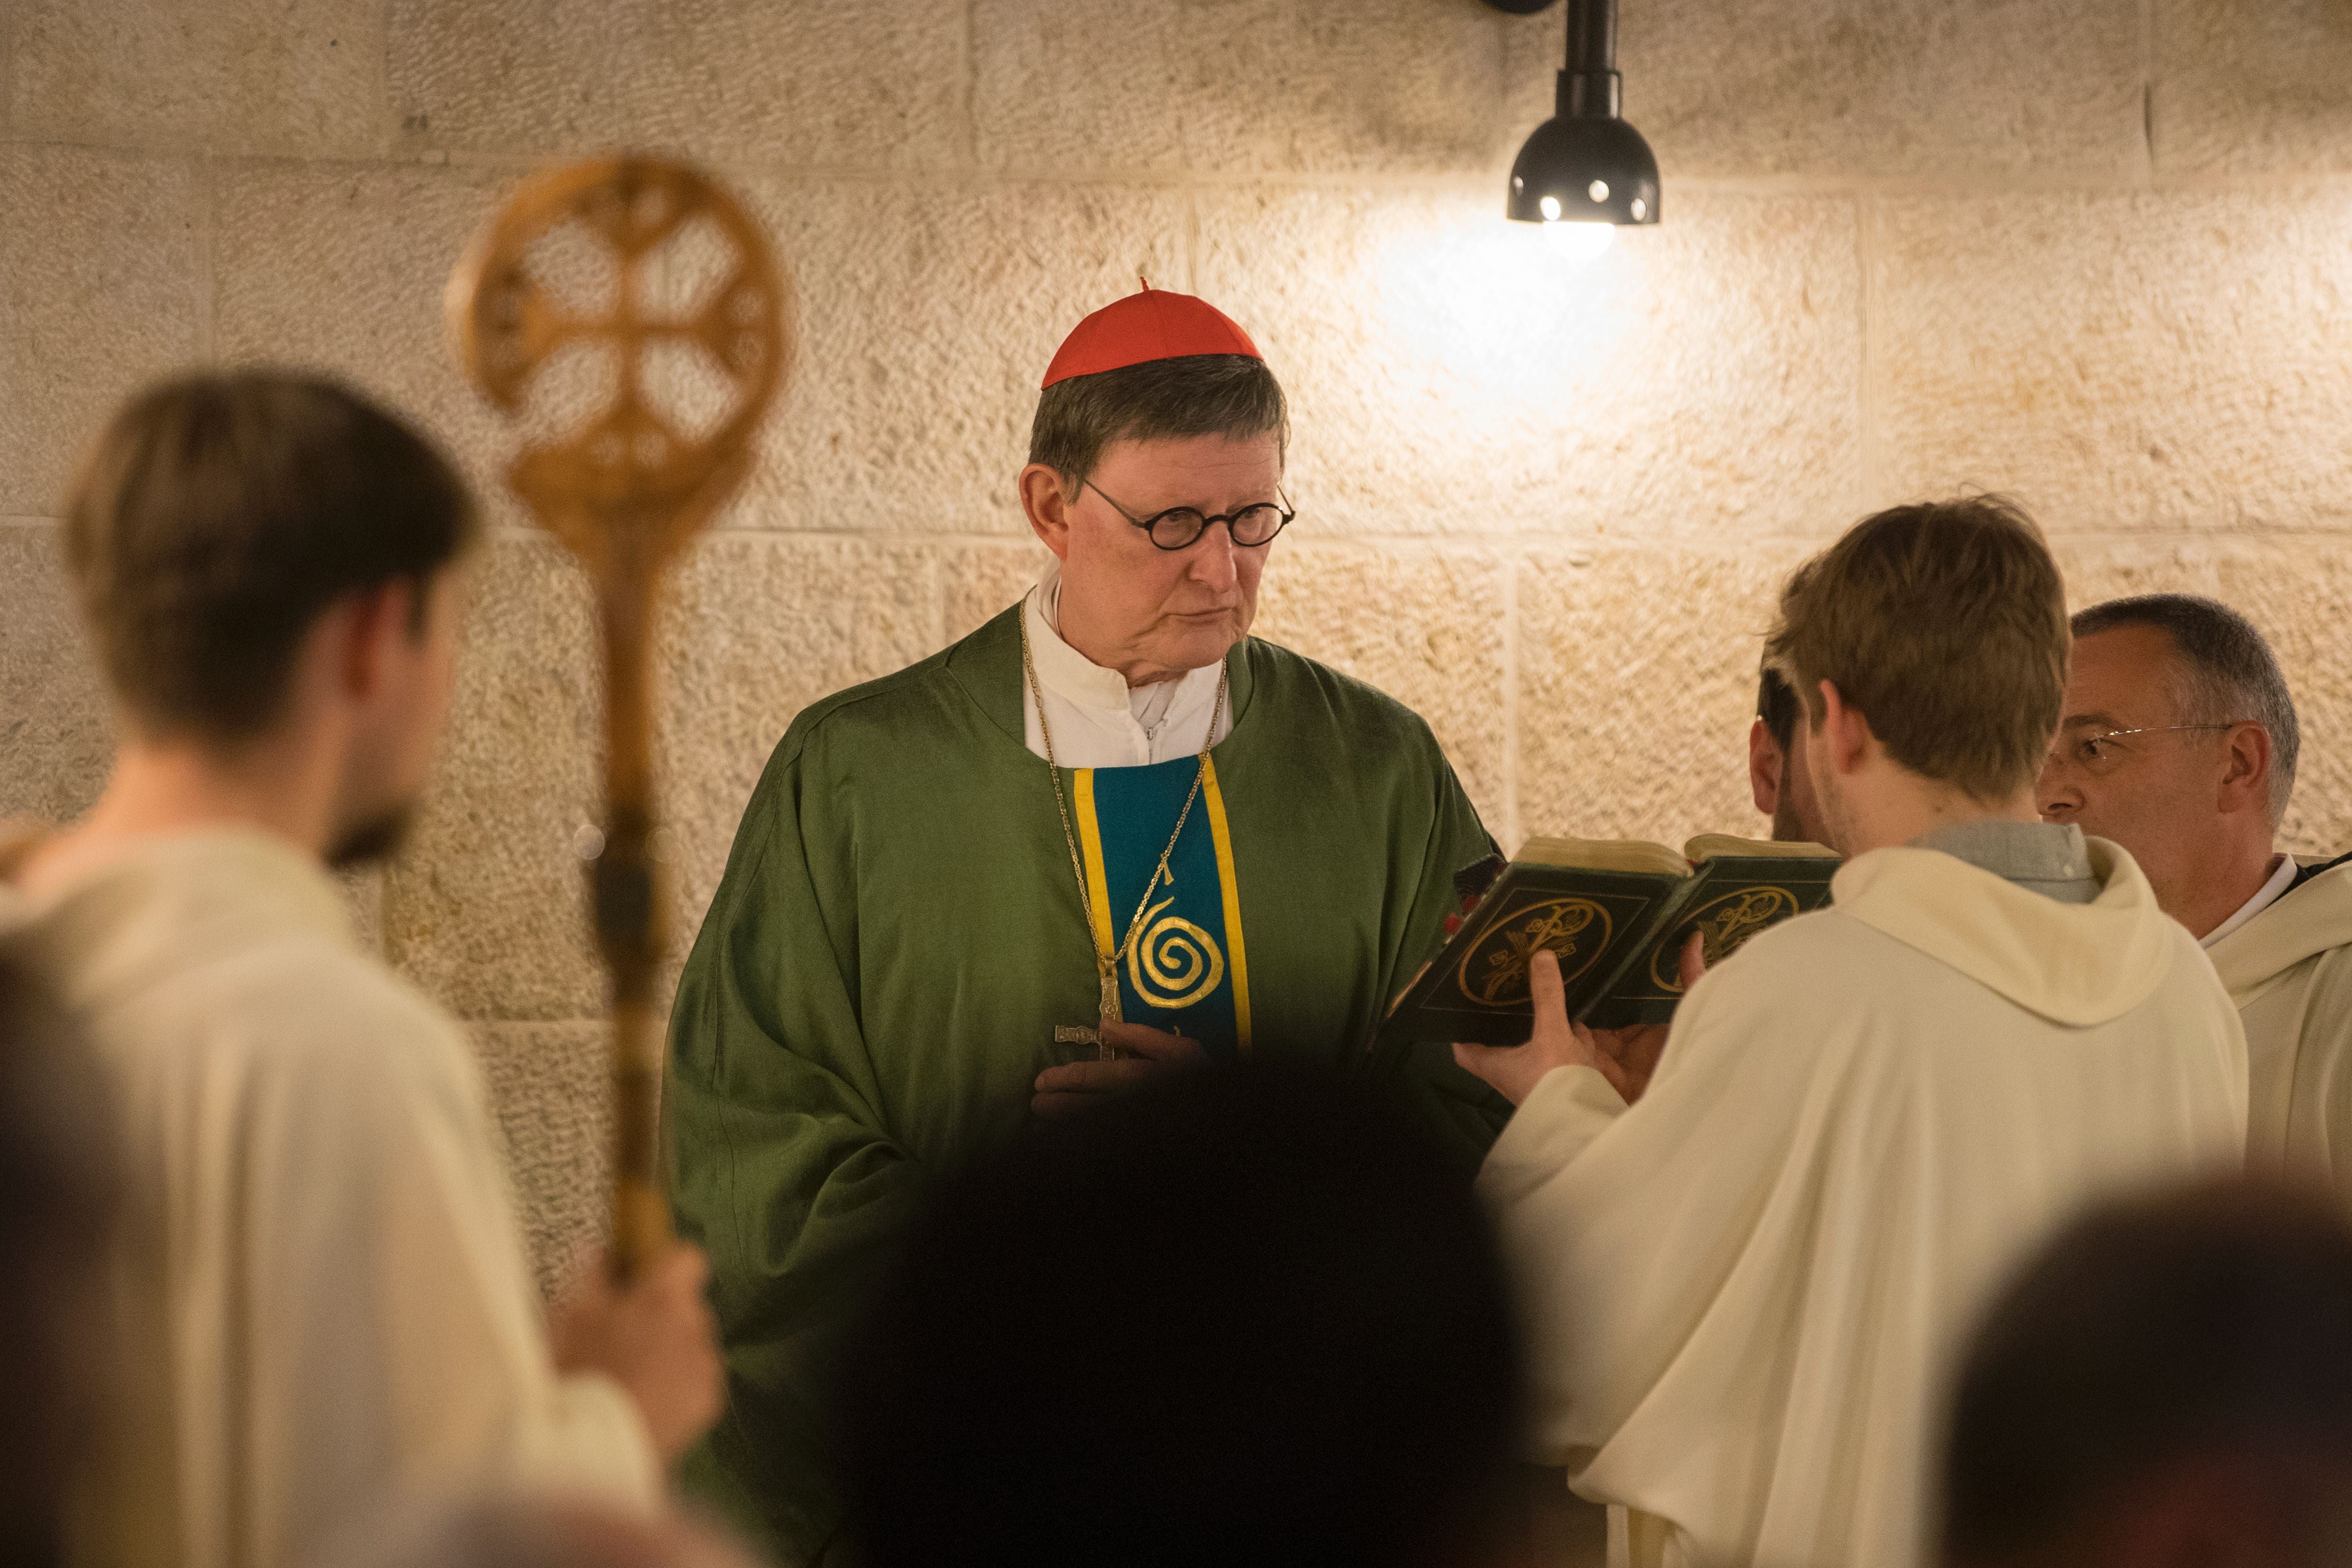 Cardinal Rainer Woelki leading a mass at the Church of the Multiplication of the Loaves and Fish in Tabgha in 2017